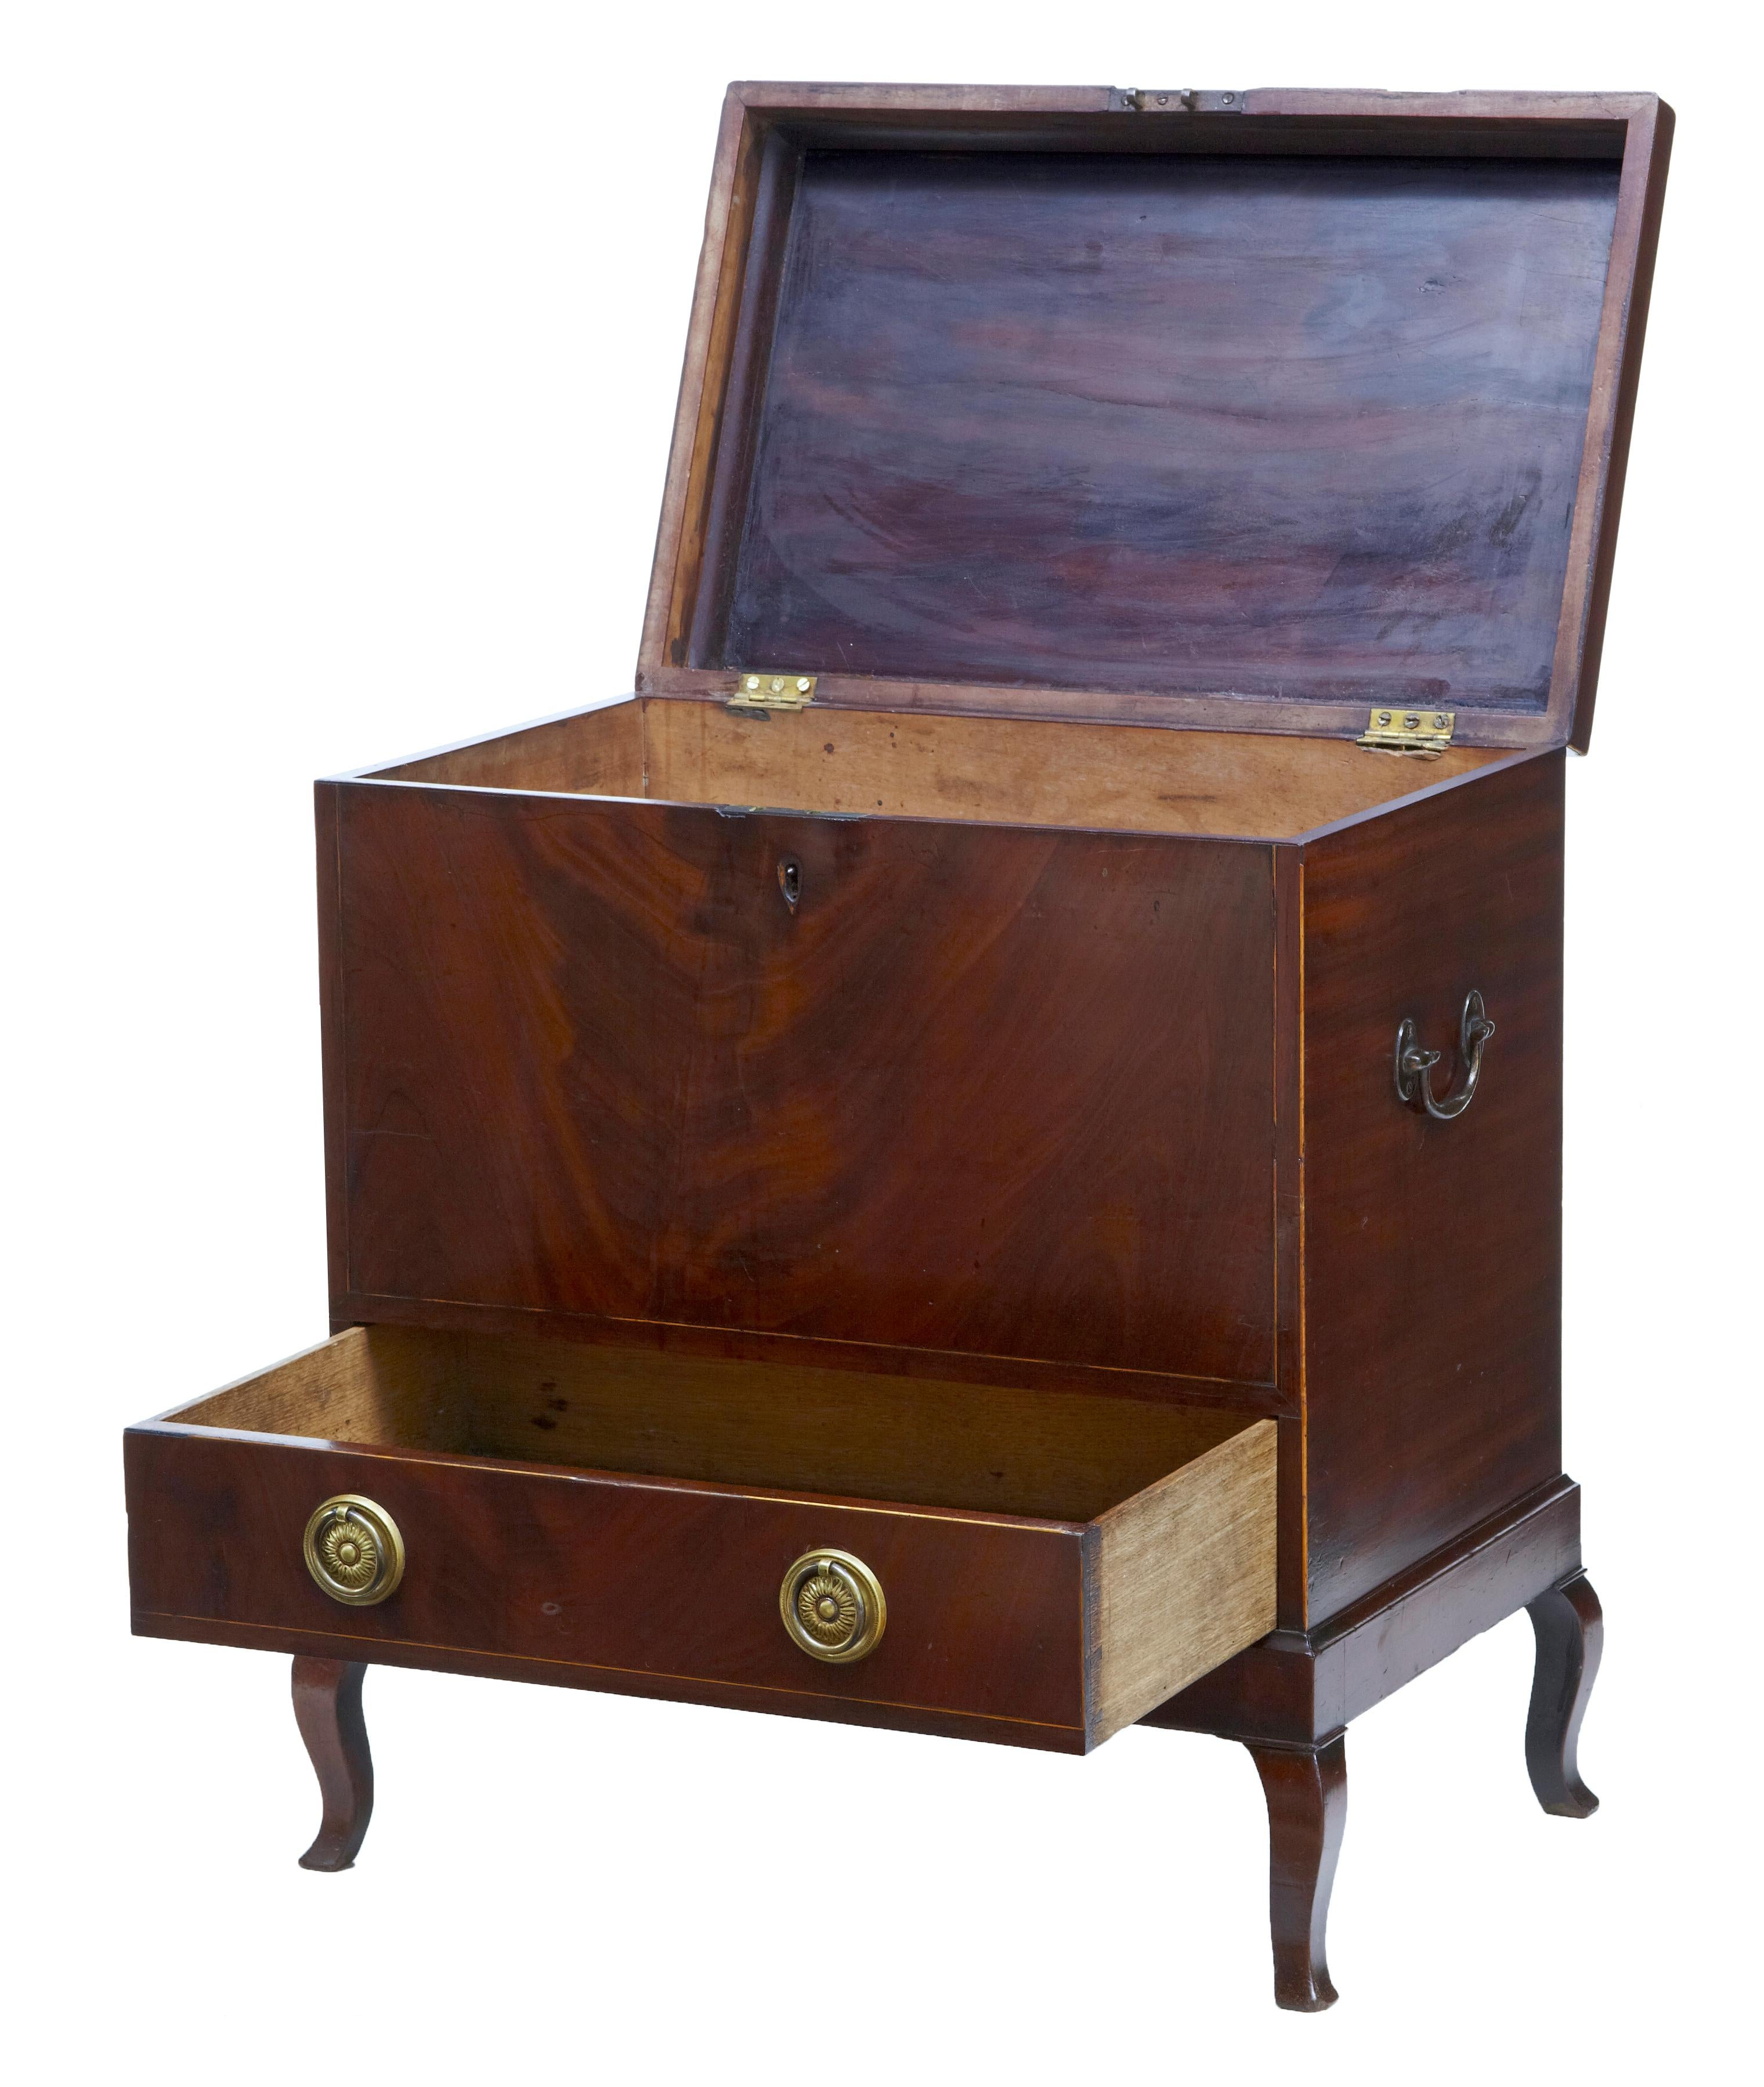 Early 20th century Edwardian mahogany inlaid wine cooler, circa 1905.

Sheraton revival wine cooler cellarette. Top with oval stringing and inlaid ebony. Lid opens to reveal compartments for bottle storage, drawer below. Standing on 4 cabriole